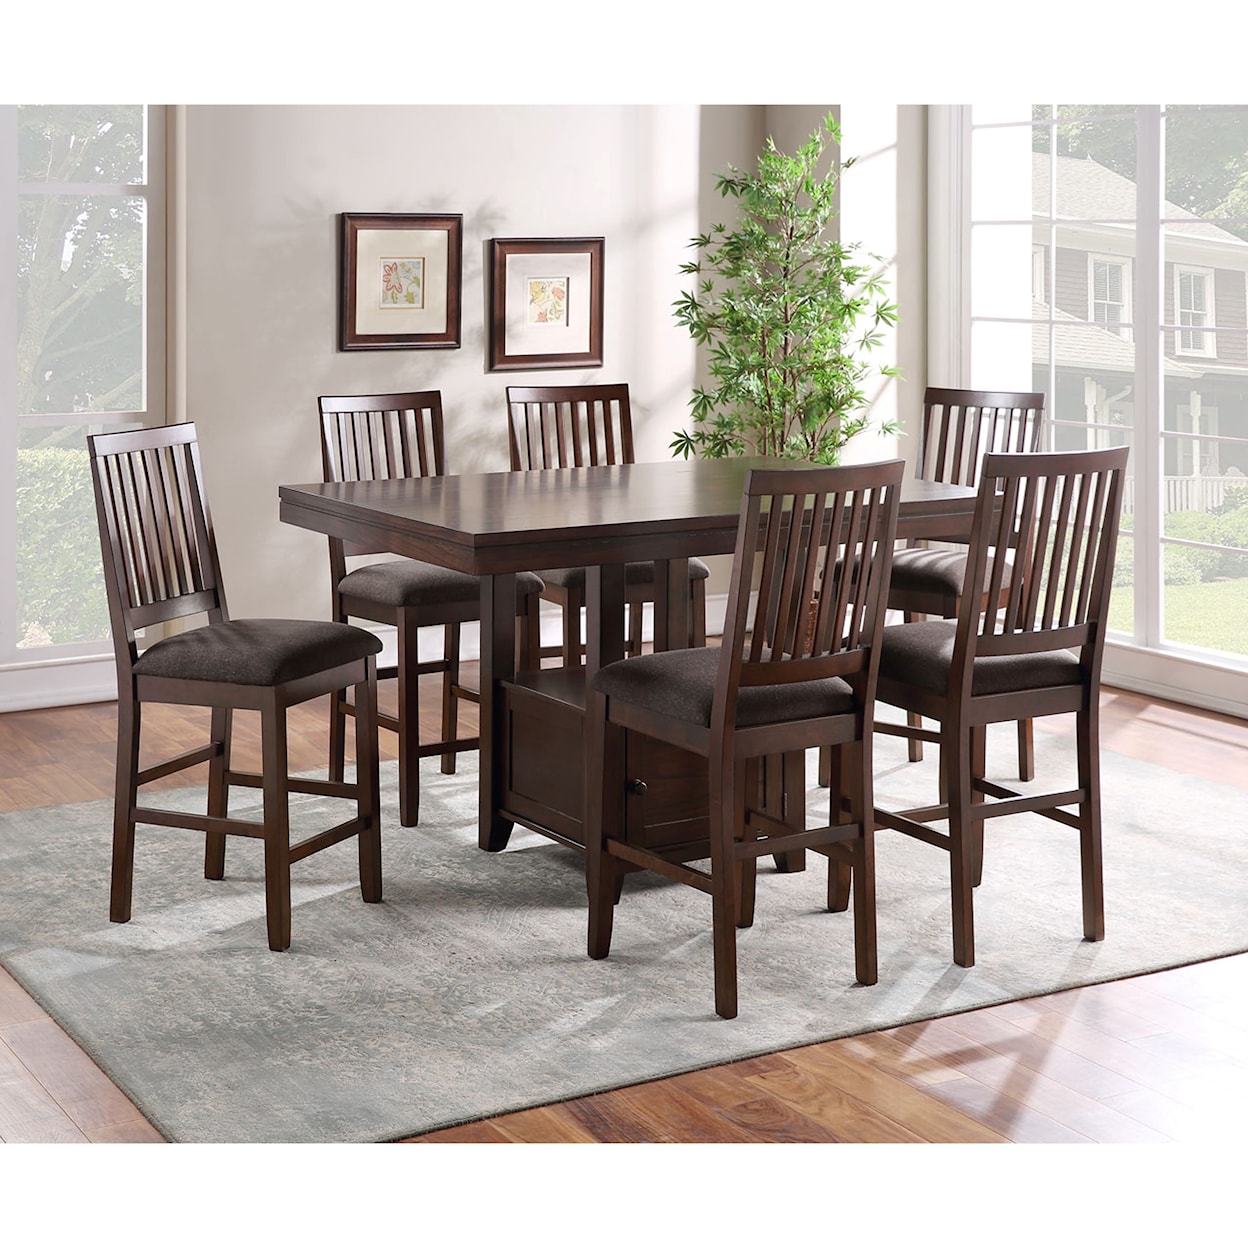 Steve Silver Yorktown 7-Piece Counter Height Table and Chair Set